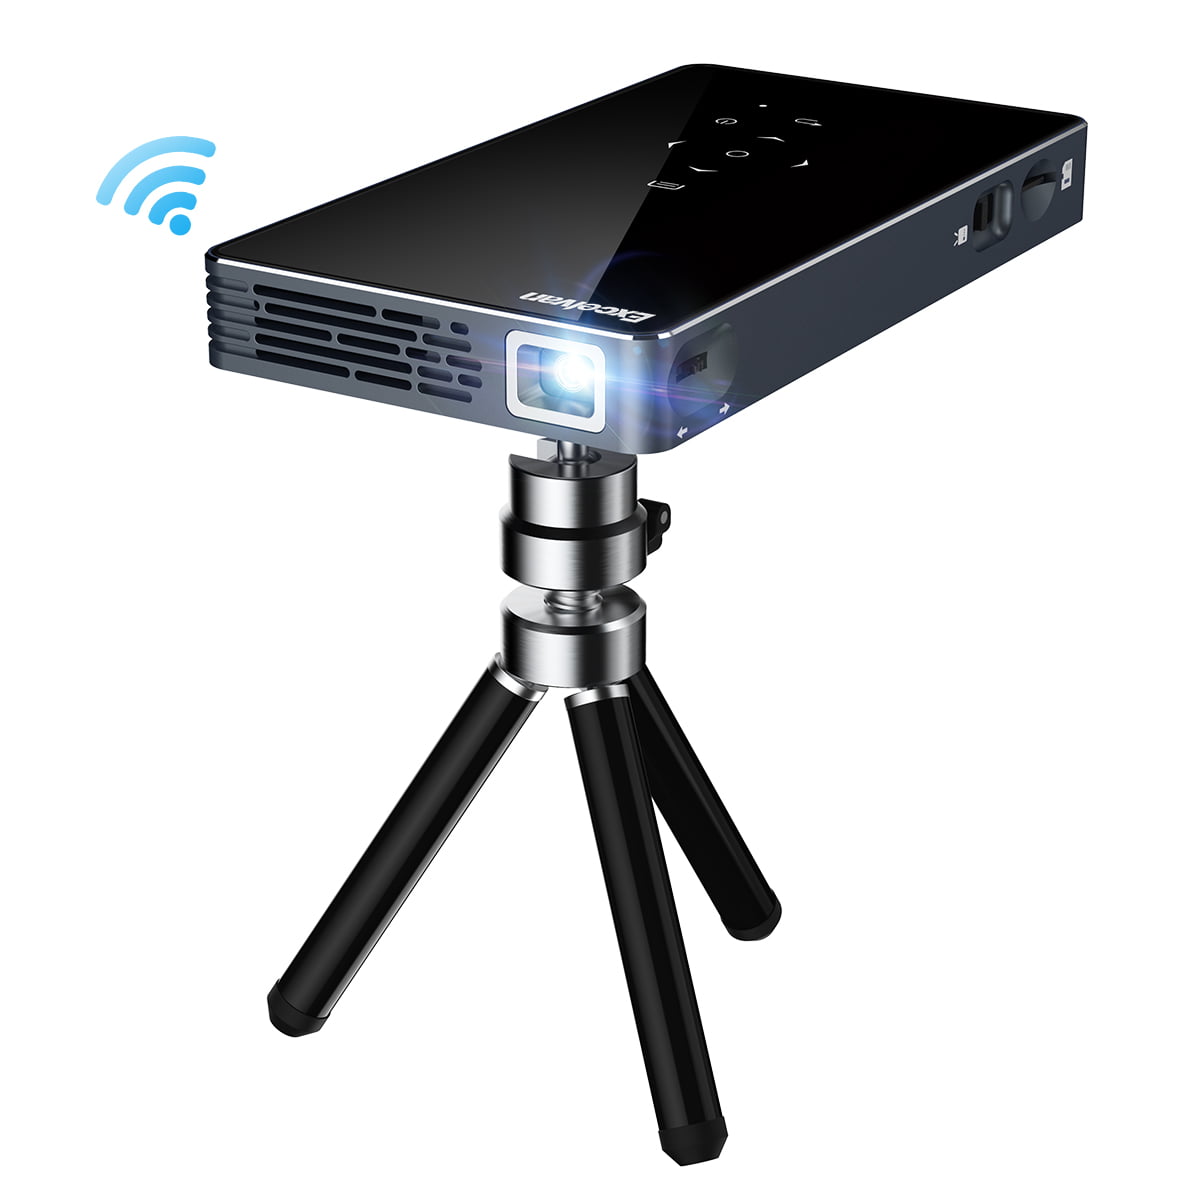 Excelvan P8I DLP Smart Projector Android 7.0 1G RAM + 8G ROM Mini